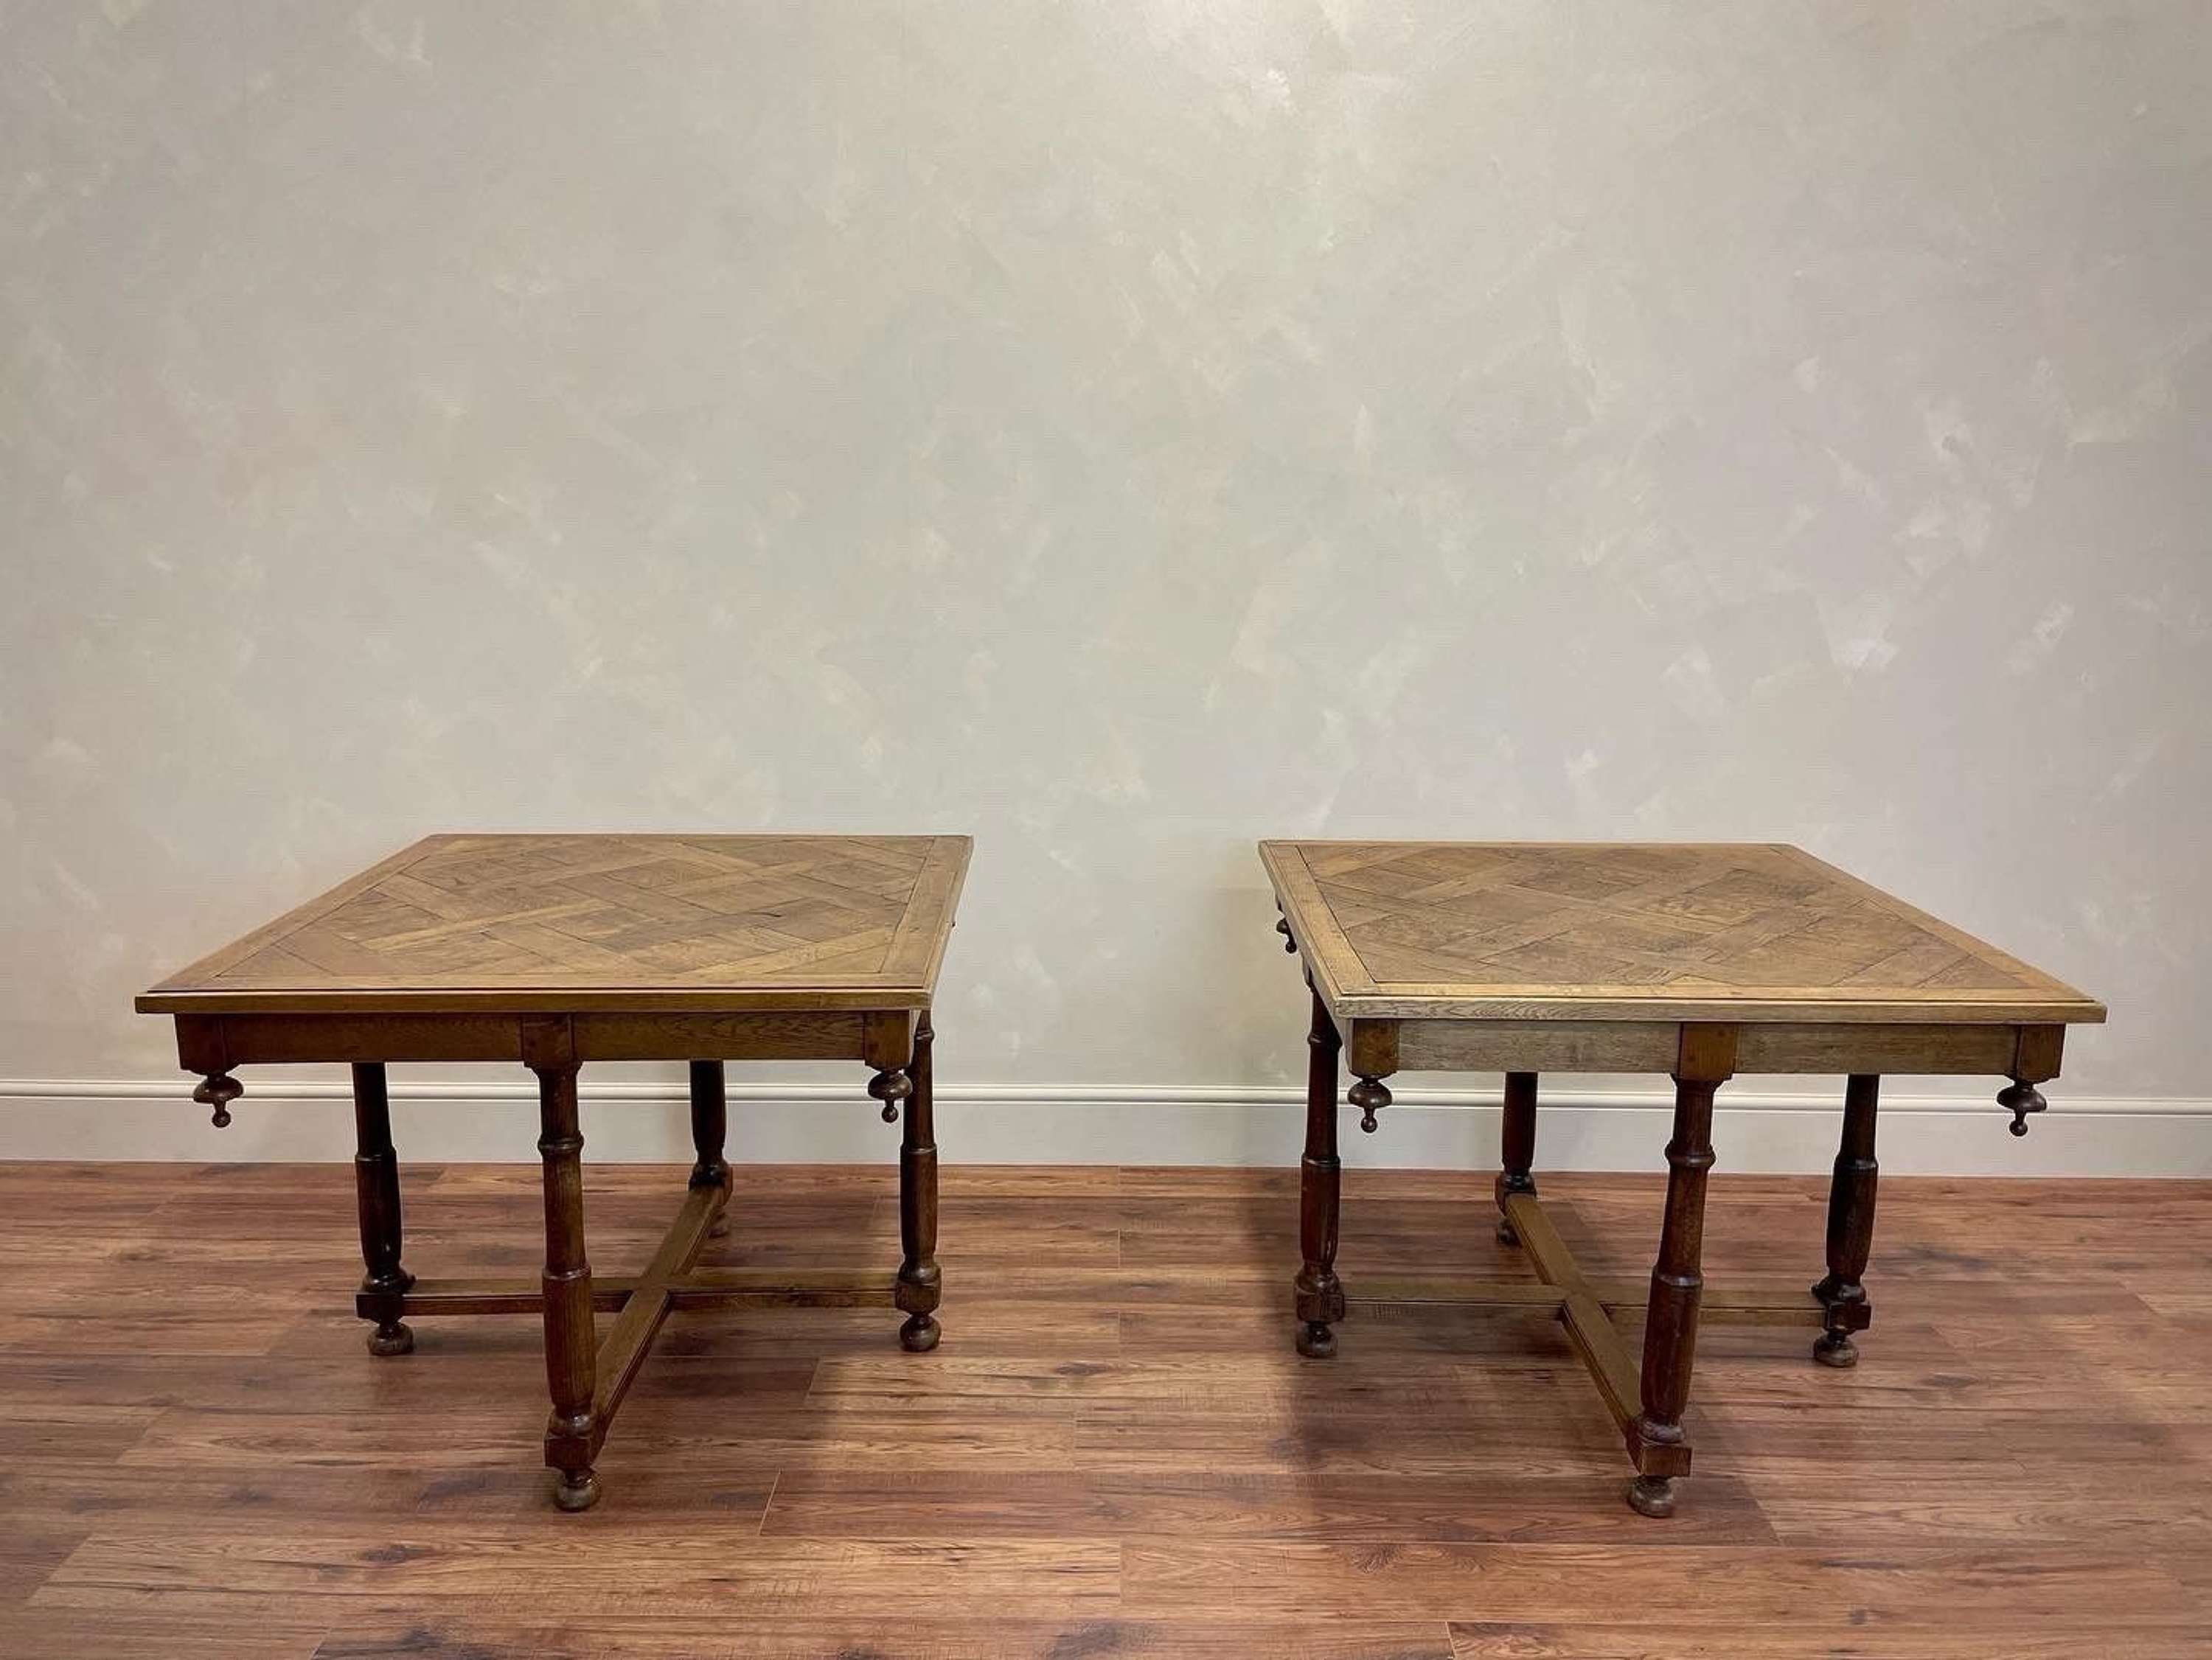 Highly unusual and super quality, pair of solid oak tables, with beautiful cross stretchers.
Old squared parquetry tops, with hand-turned finial decorations.
France 1900.
Check the sizes on these as they are larger than the photos would make them